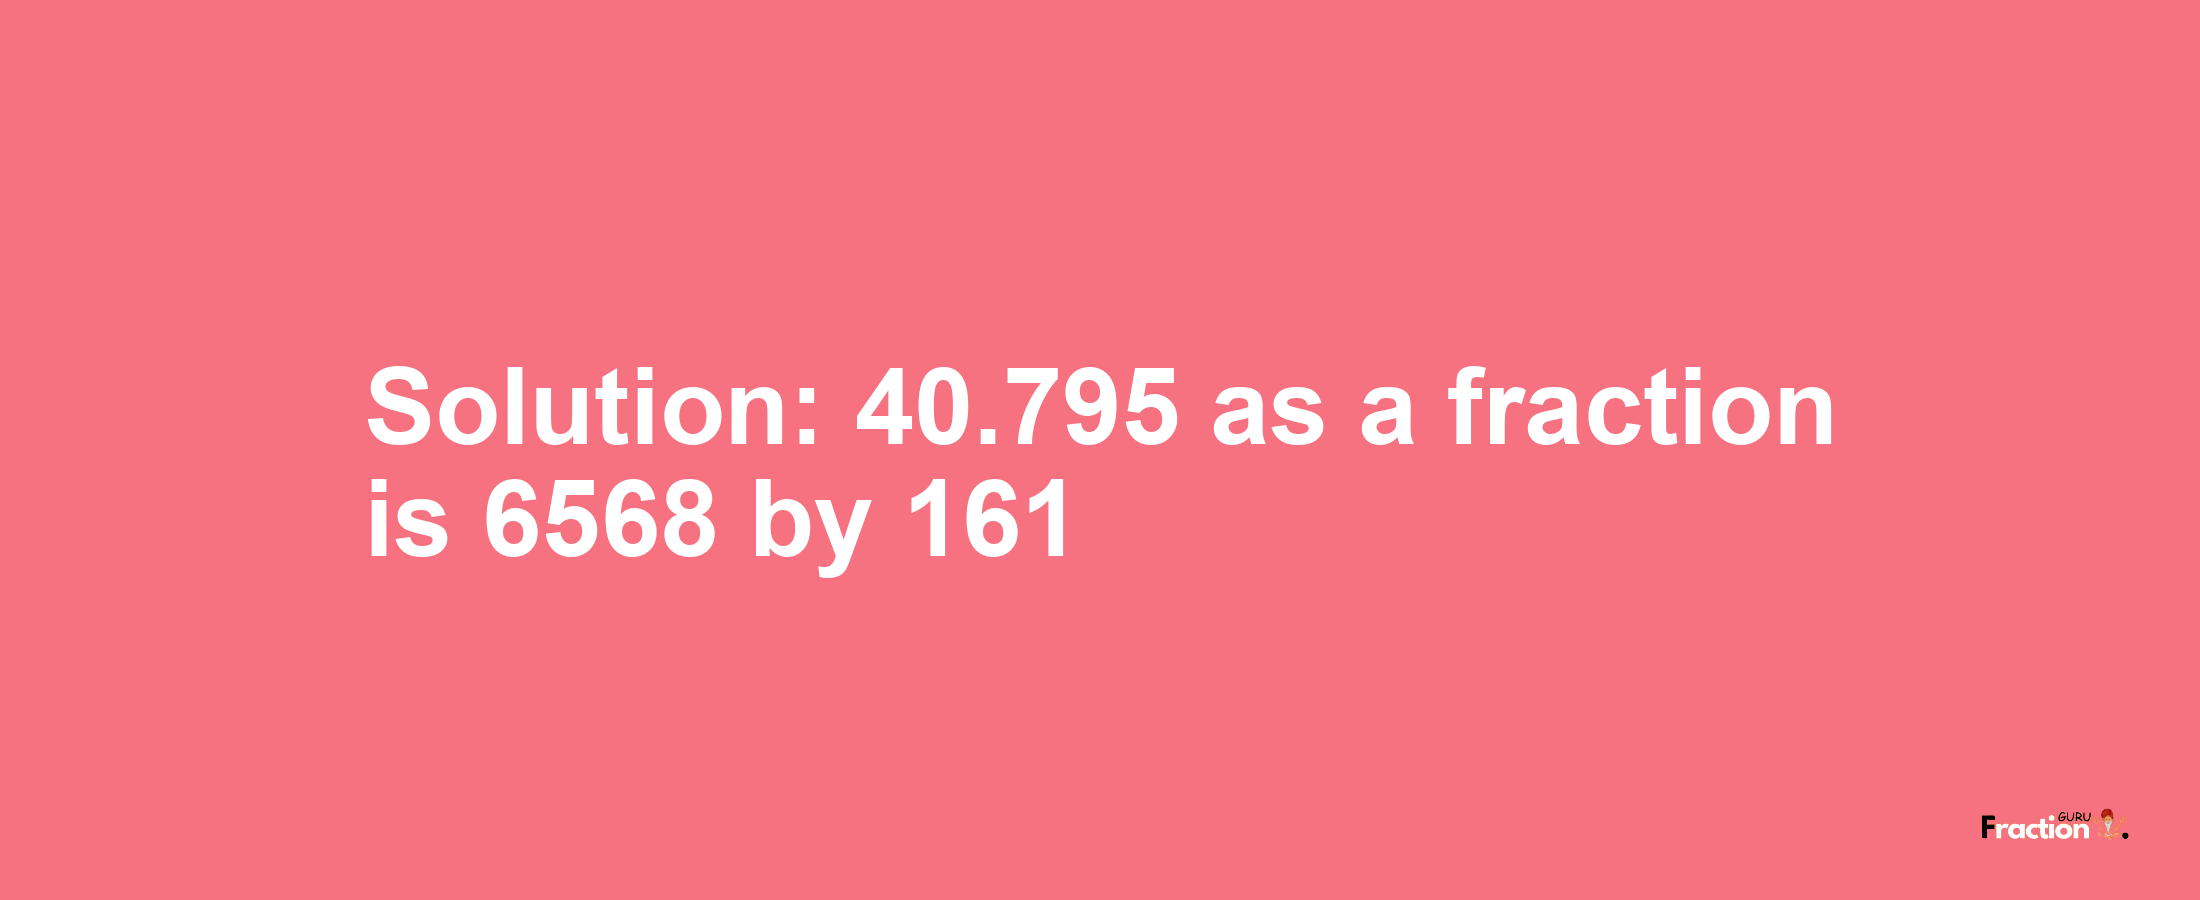 Solution:40.795 as a fraction is 6568/161